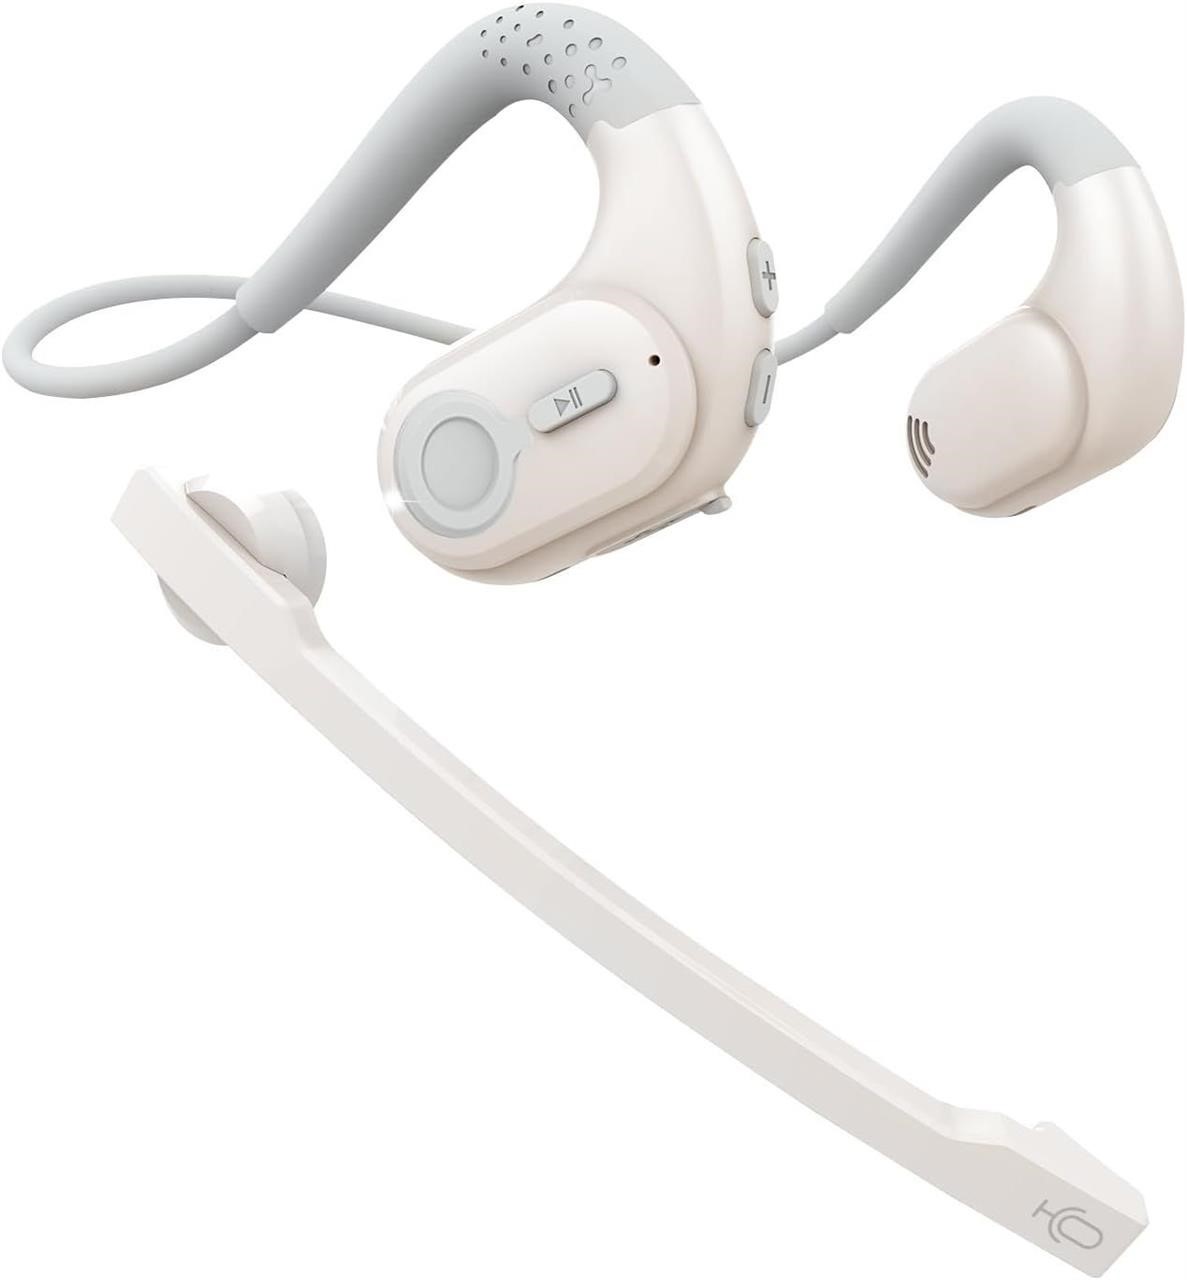 NEW / Wireless Headset with Detachable Microphone